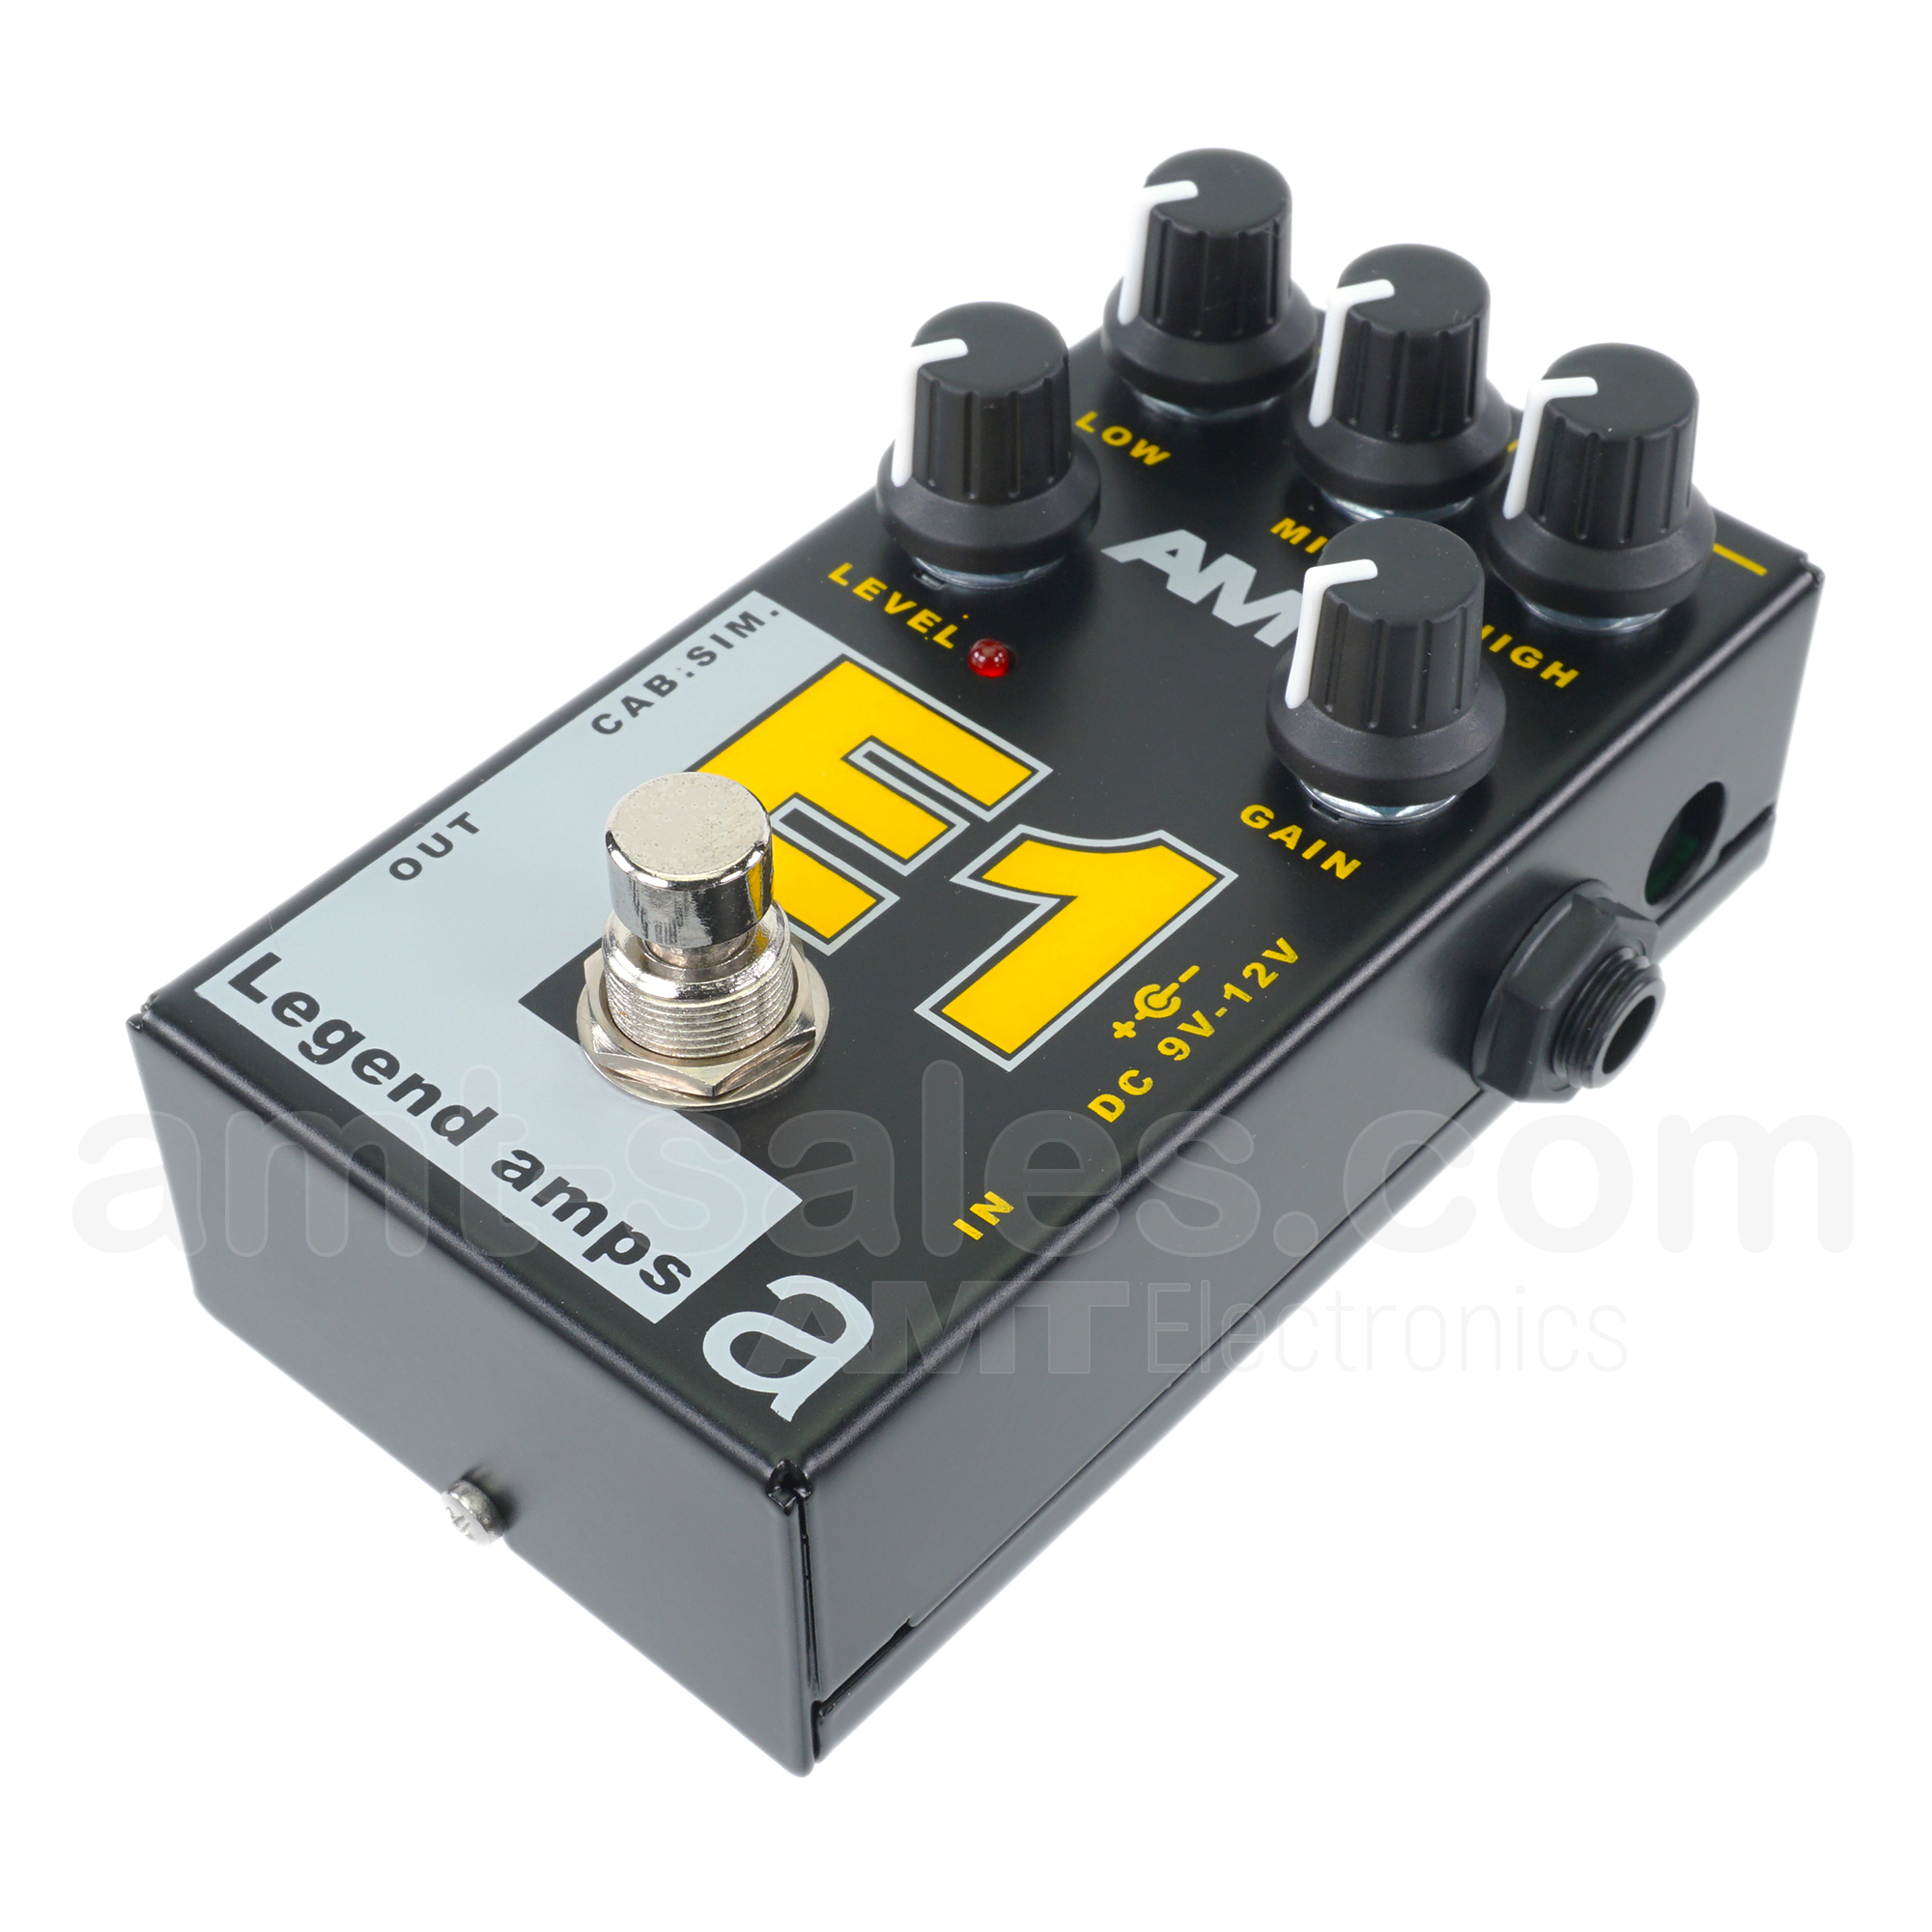 AMT E1 - JFET guitar preamp (1 channel) Engl